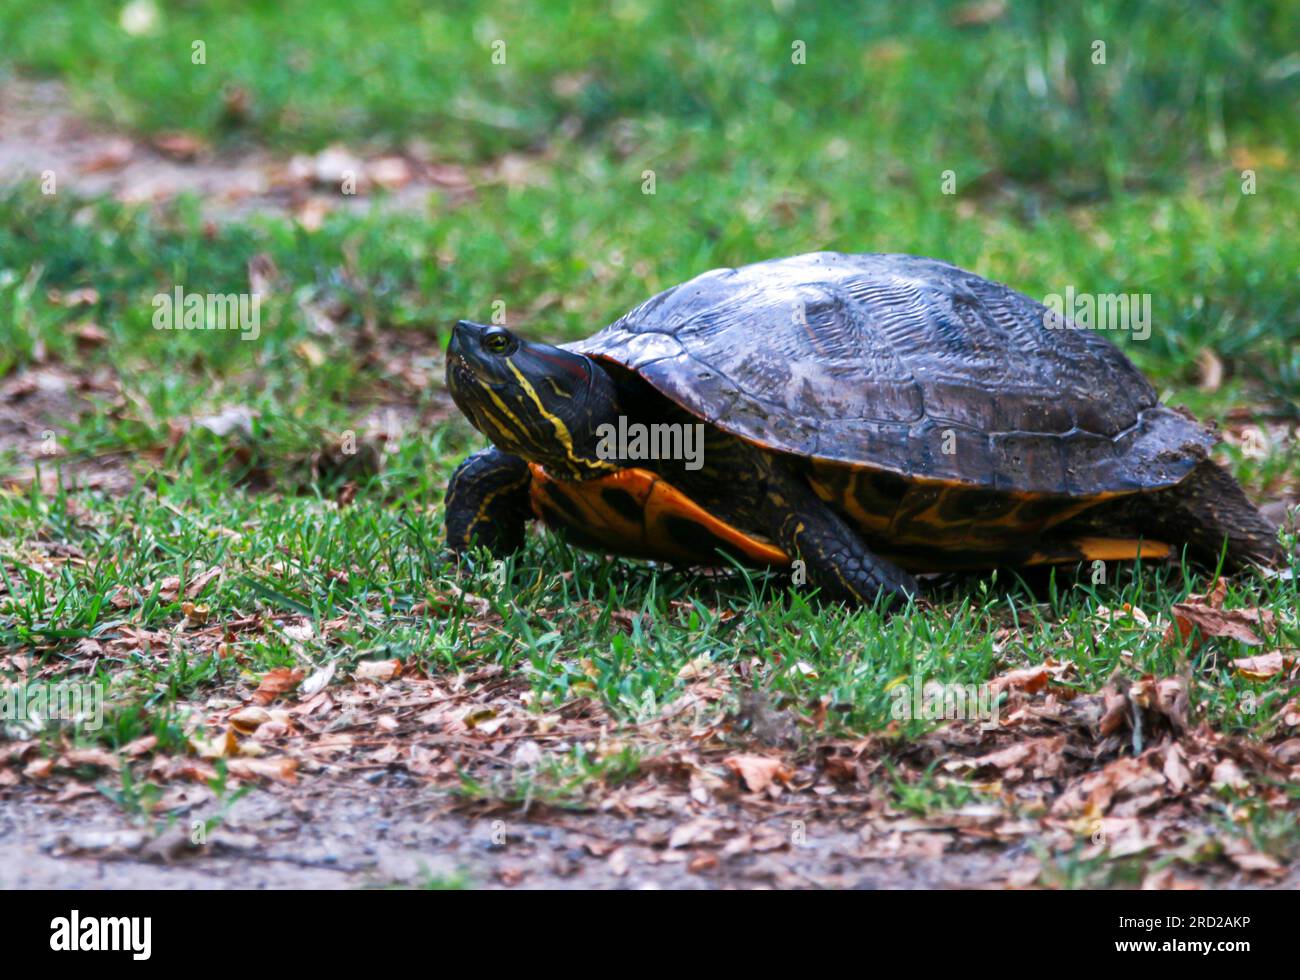 Side view of a snapping turtle laying eggs in the ground ot southards pond in Babylon Village New York. Stock Photo